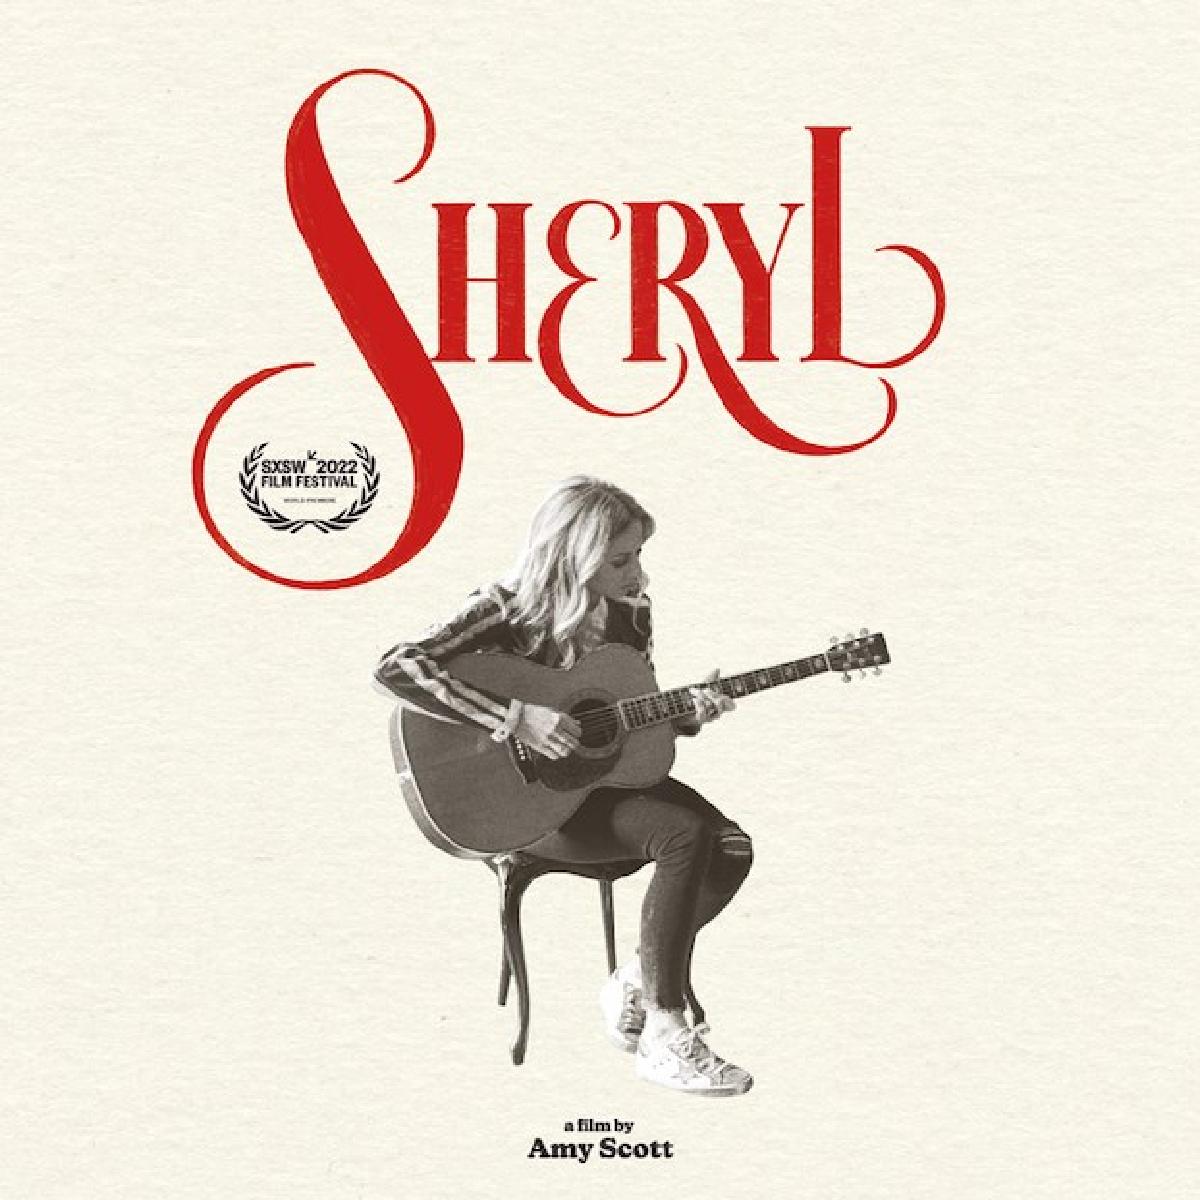 Sherly Trailer Is Out, Biopic Based On The Country Singer